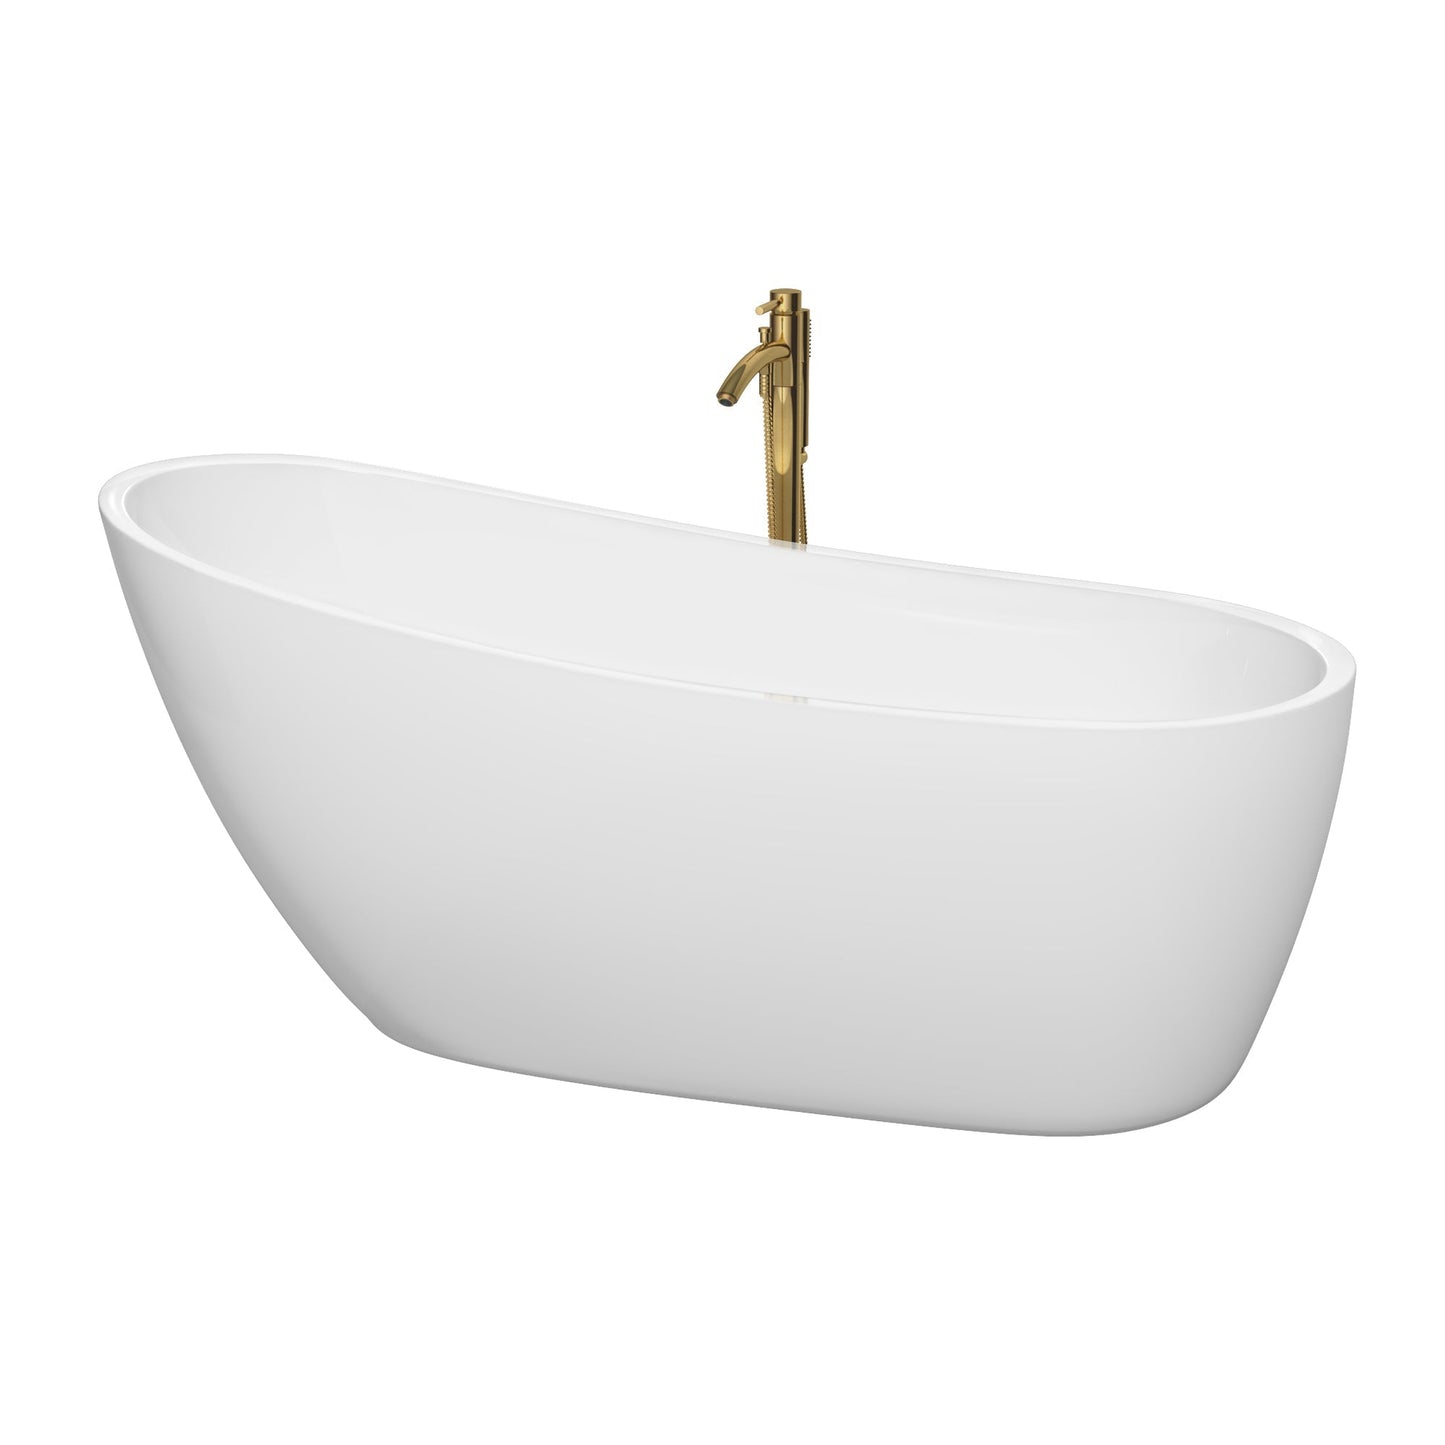 Wyndham Collection Florence 68" Freestanding Bathtub in White With Polished Chrome Trim and Floor Mounted Faucet in Brushed Gold